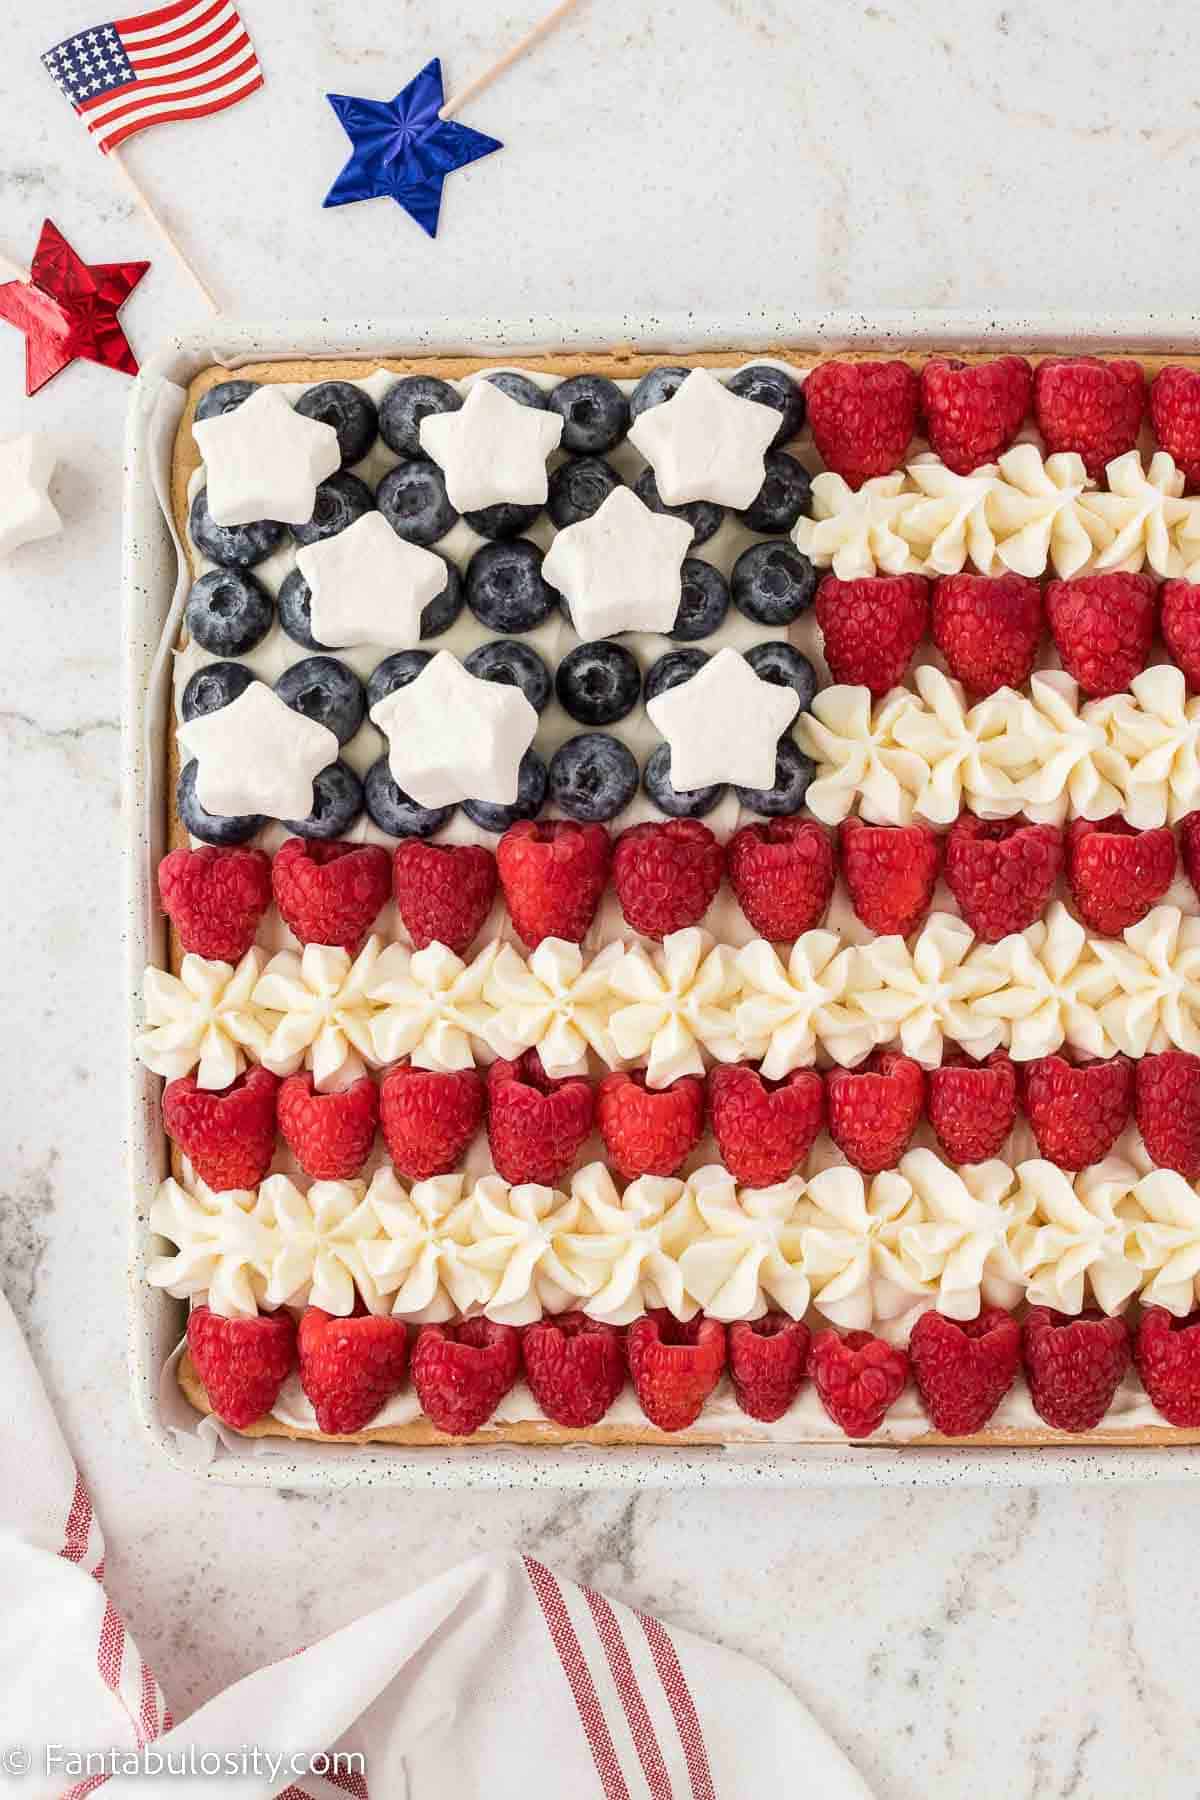 Star marshmallows added to American flag fruit pizza.